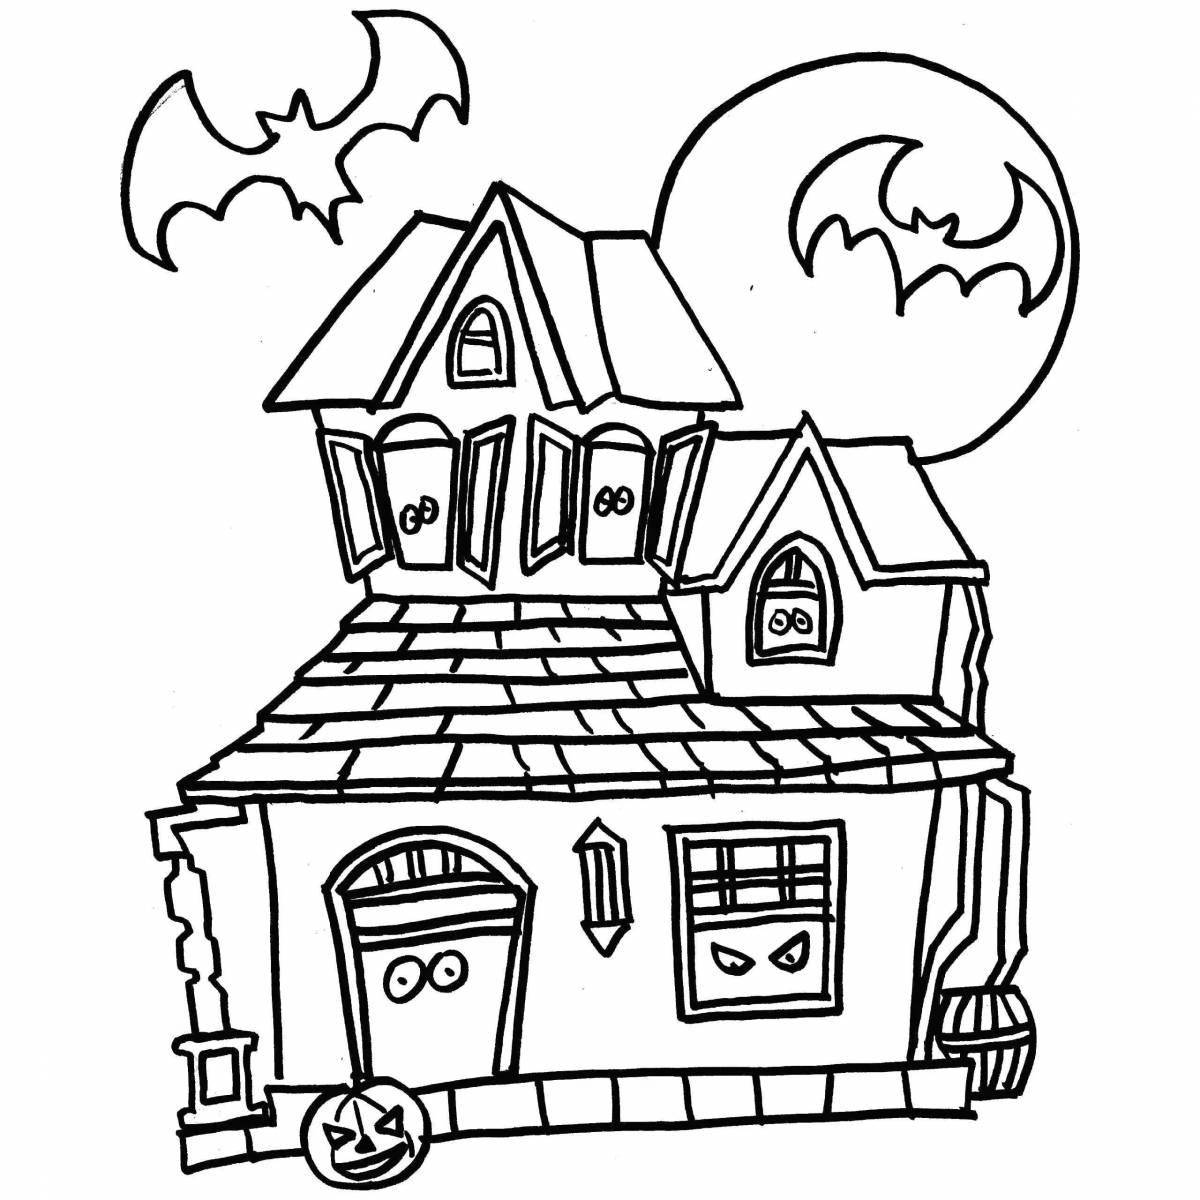 Coloring playful house